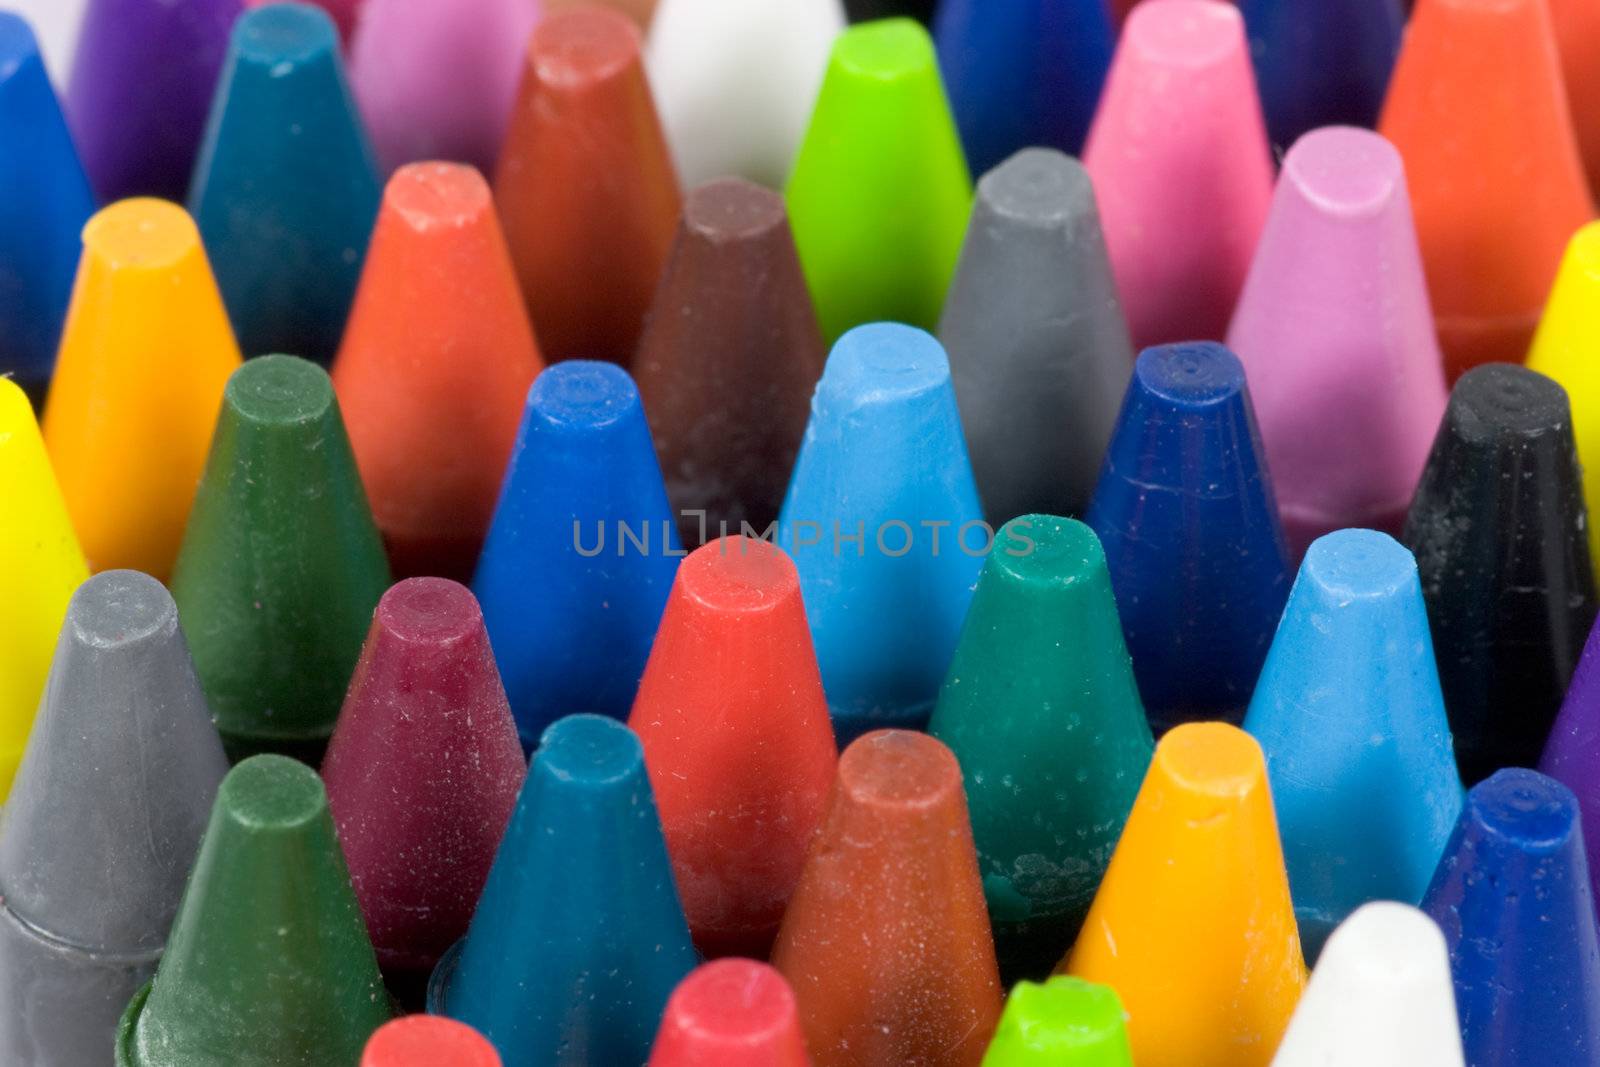 Crayons by naumoid